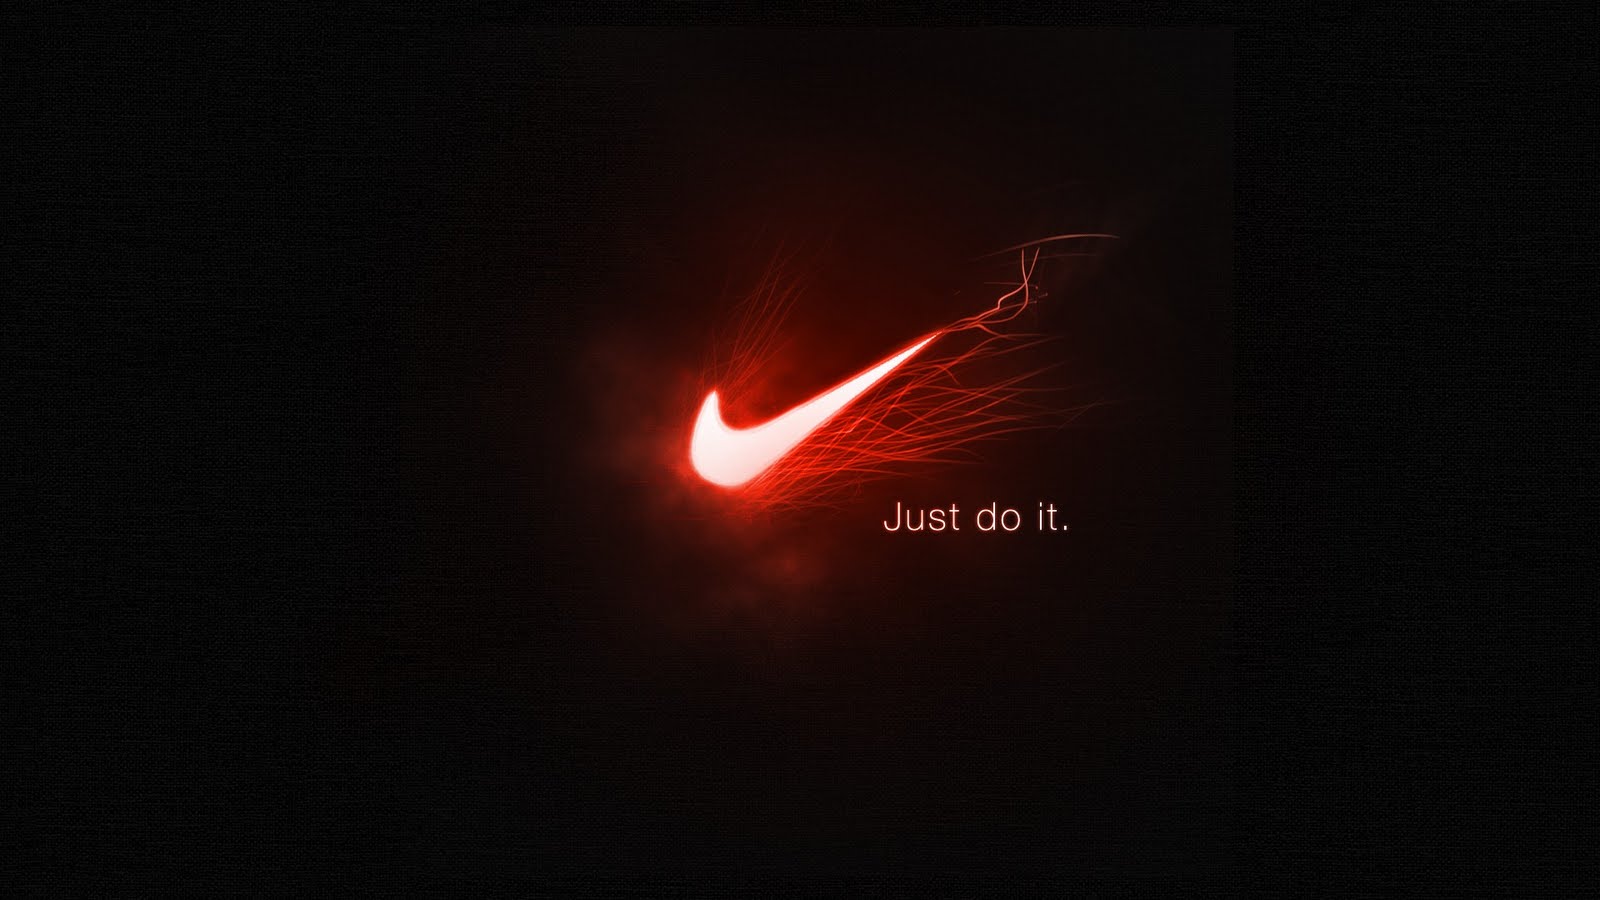 Free download Nike Football Wallpaper 9153 Hd Wallpapers in Football  Imagescicom [1600x900] for your Desktop, Mobile & Tablet | Explore 49+ Nike Laptop  Wallpaper | Laptop Backgrounds, Nike Wallpapers, Nike Wallpaper For Laptop